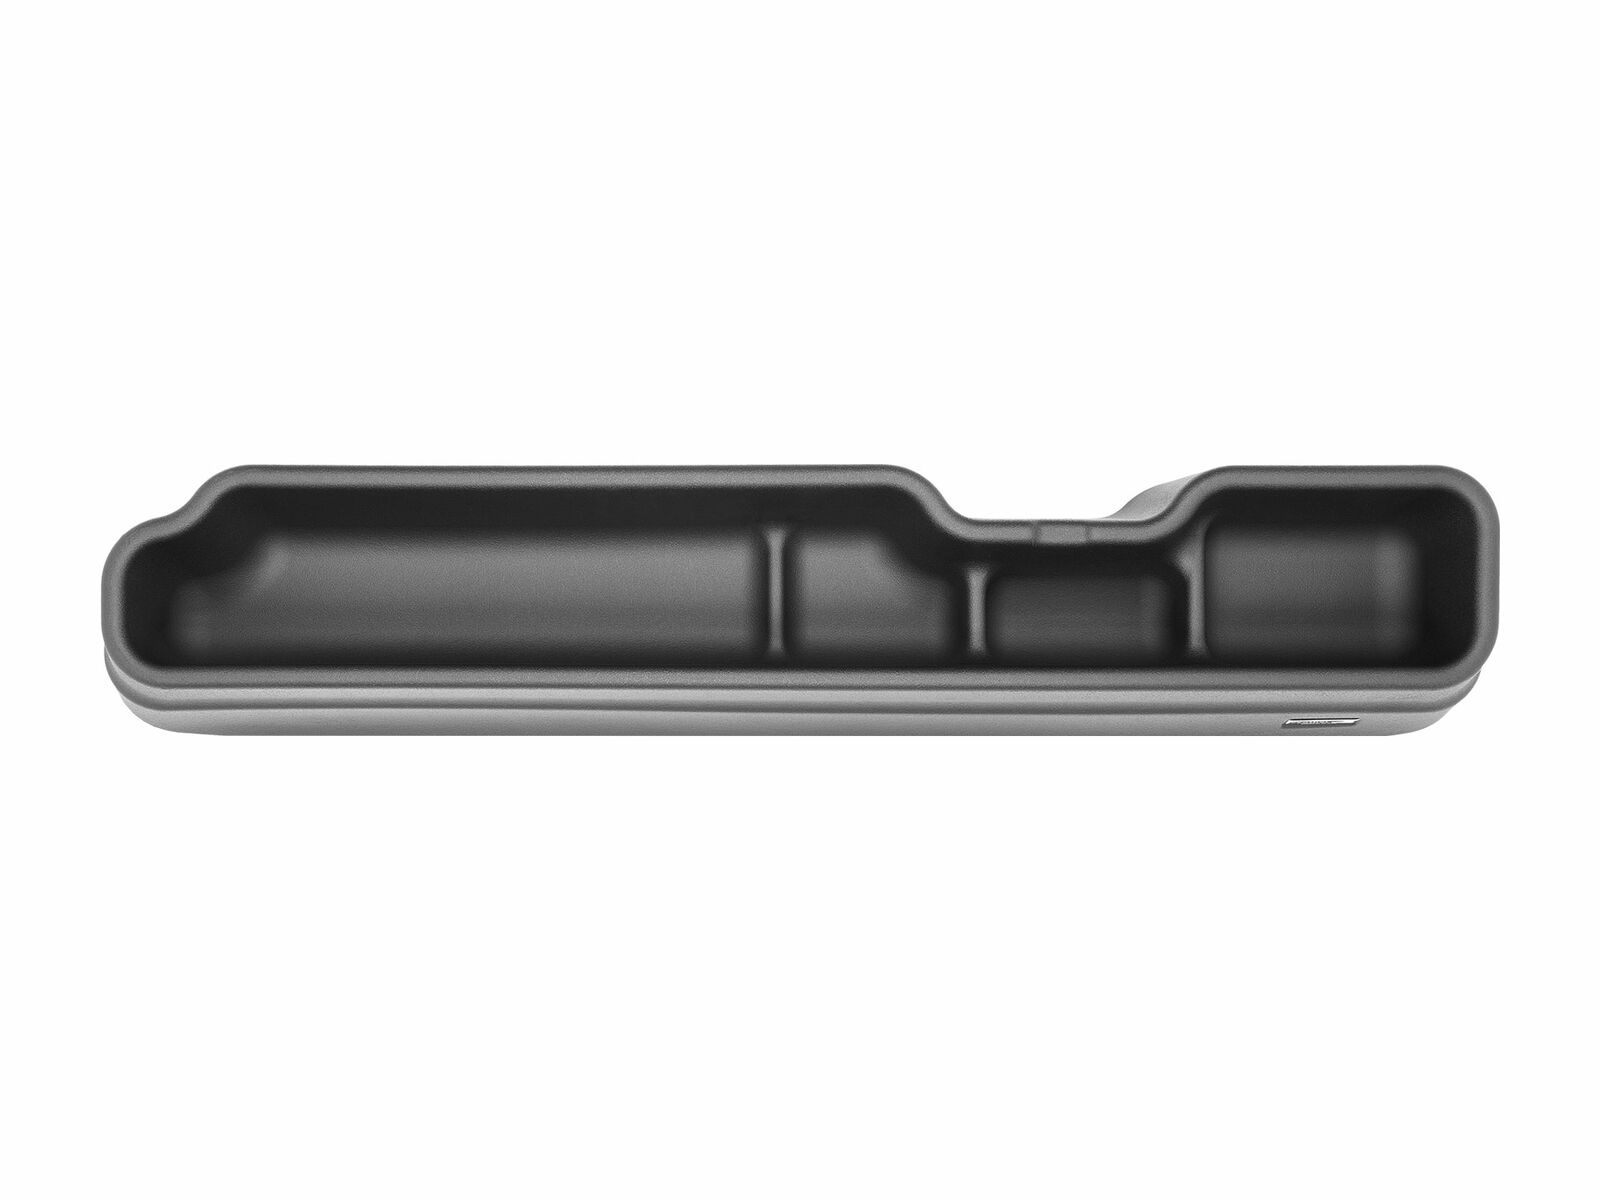 WeatherTech Under Seat Storage System for 1999-2016 Ford F-250 Extended Cab